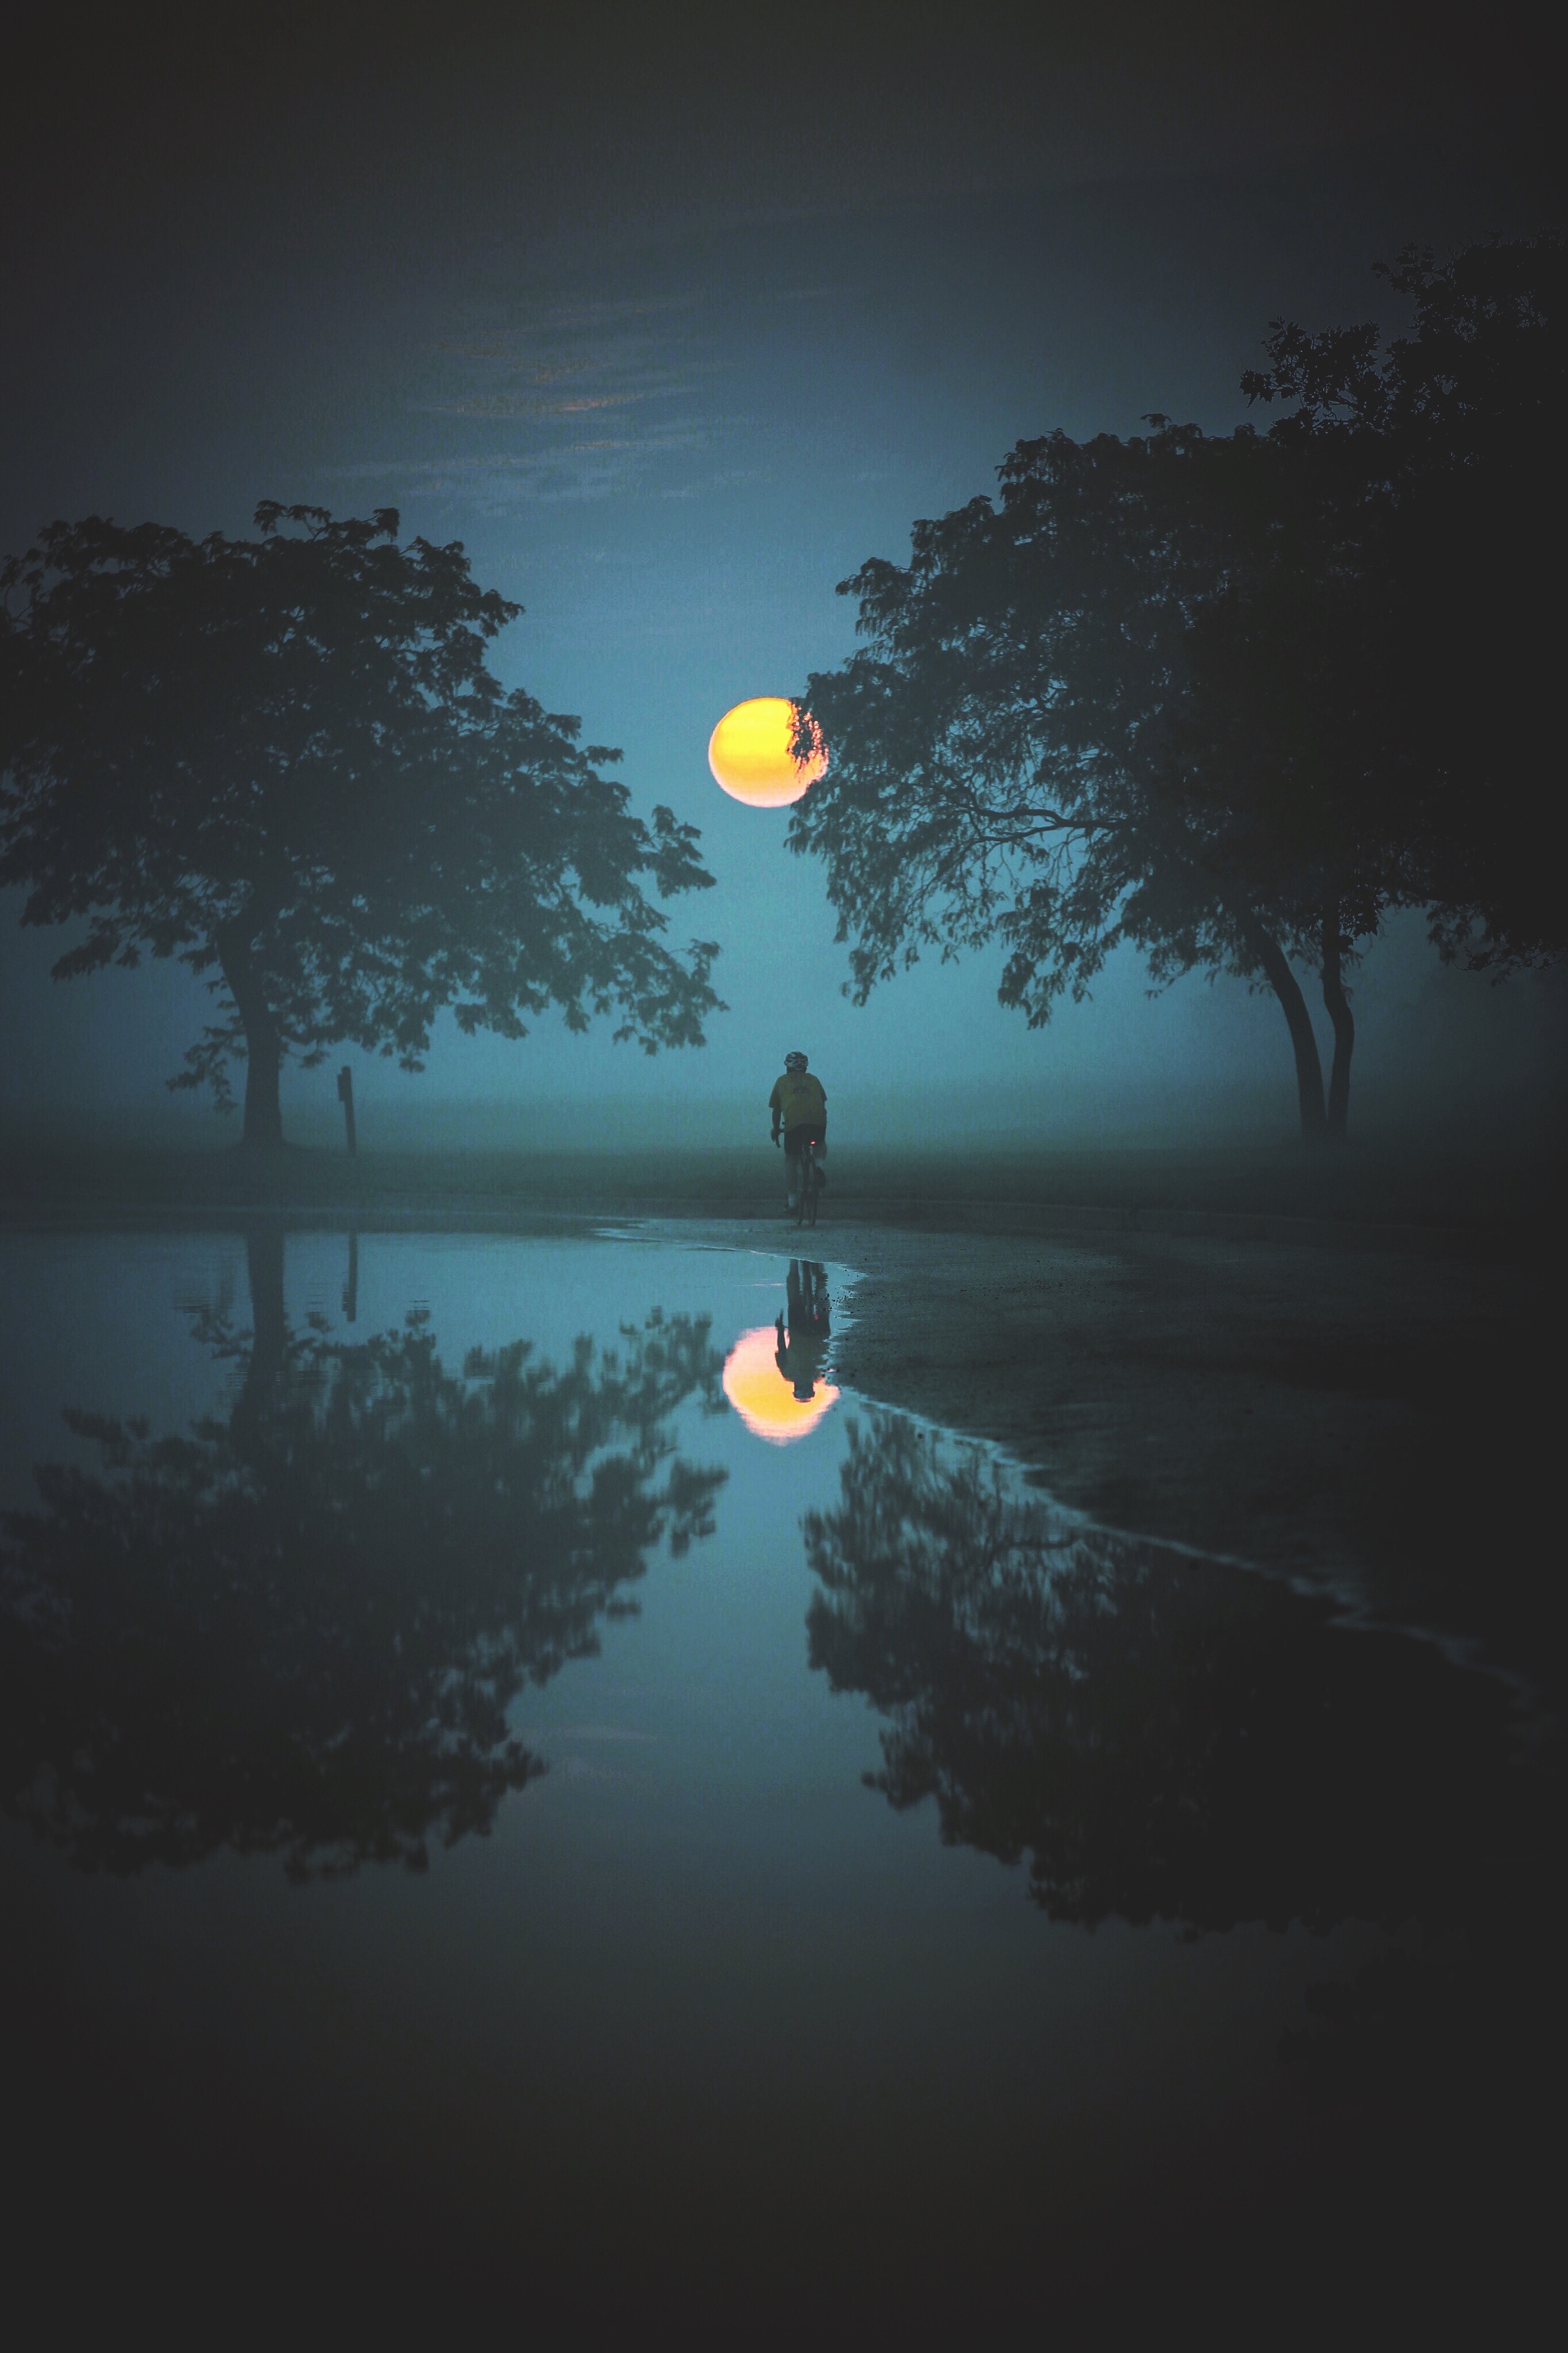 reflection, cyclist, moon, nature, water, trees, fog phone wallpaper